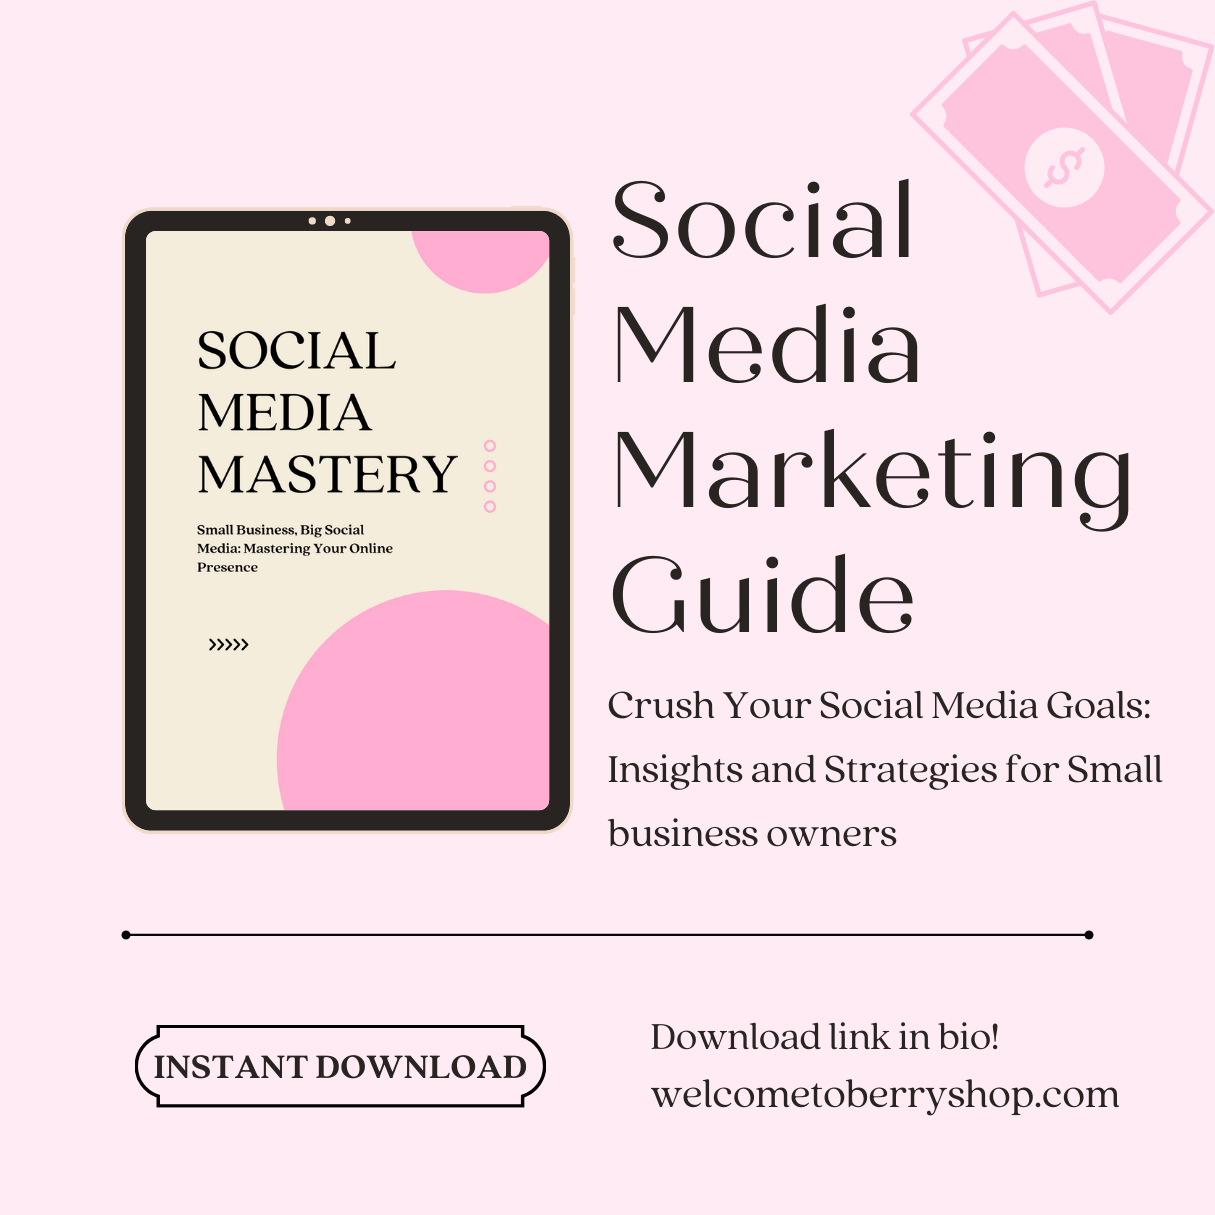 Social Media Mastery: Tips for Social Media Marketing by Berry (Instant Download)